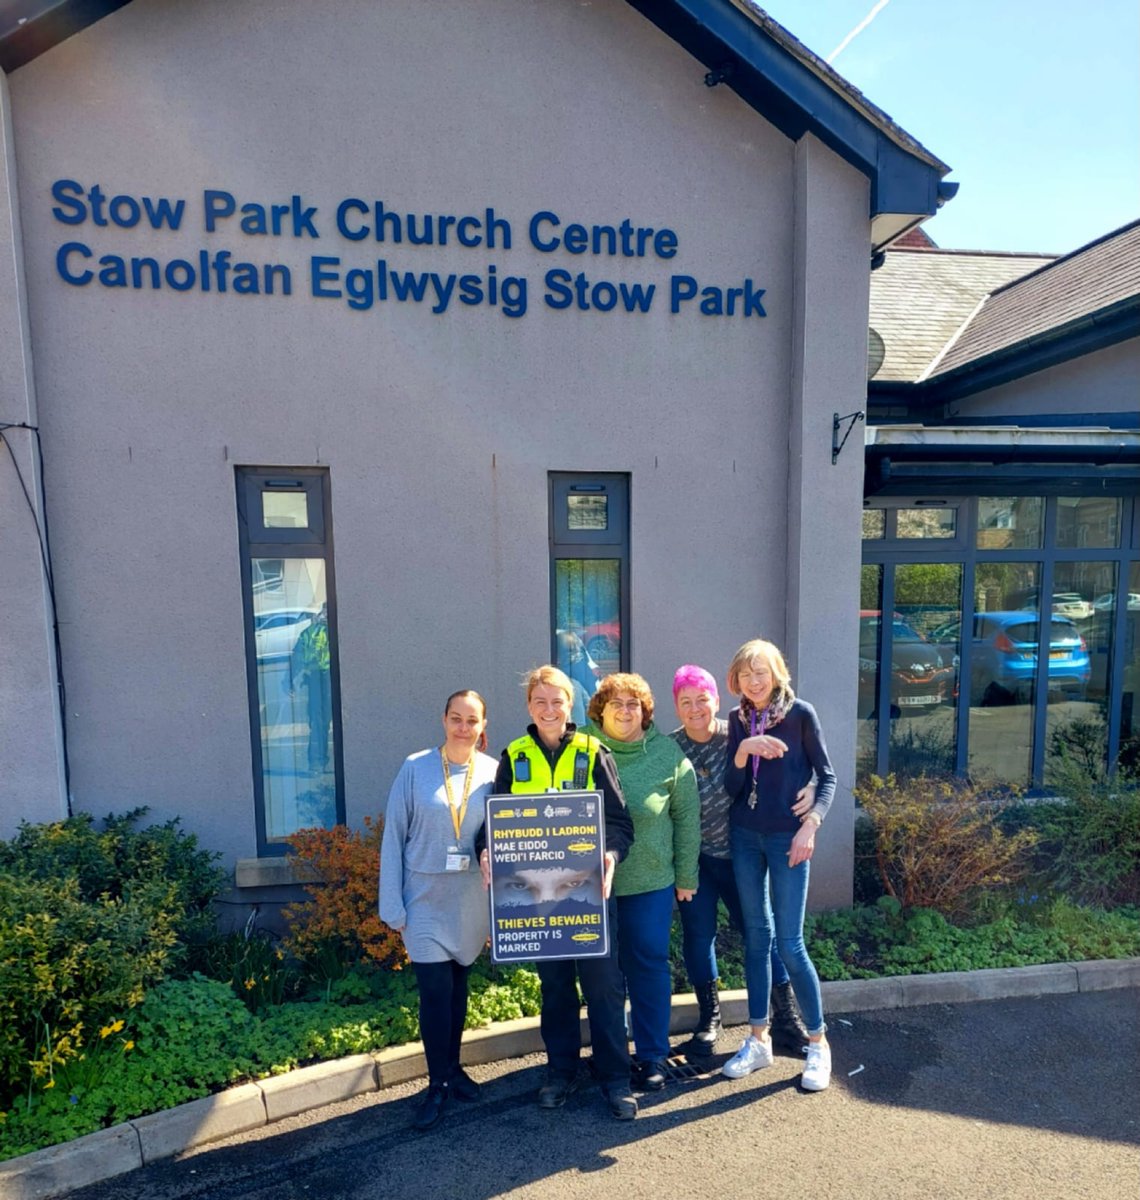 Our Business Crime Officers have been visiting organisations across the force area, helping to keep our communities safe. They’ve been giving advice on crime prevention along with signage and Smart Water technology.

#protectandreassure

@GwentPCC 
@DeterTech_UK